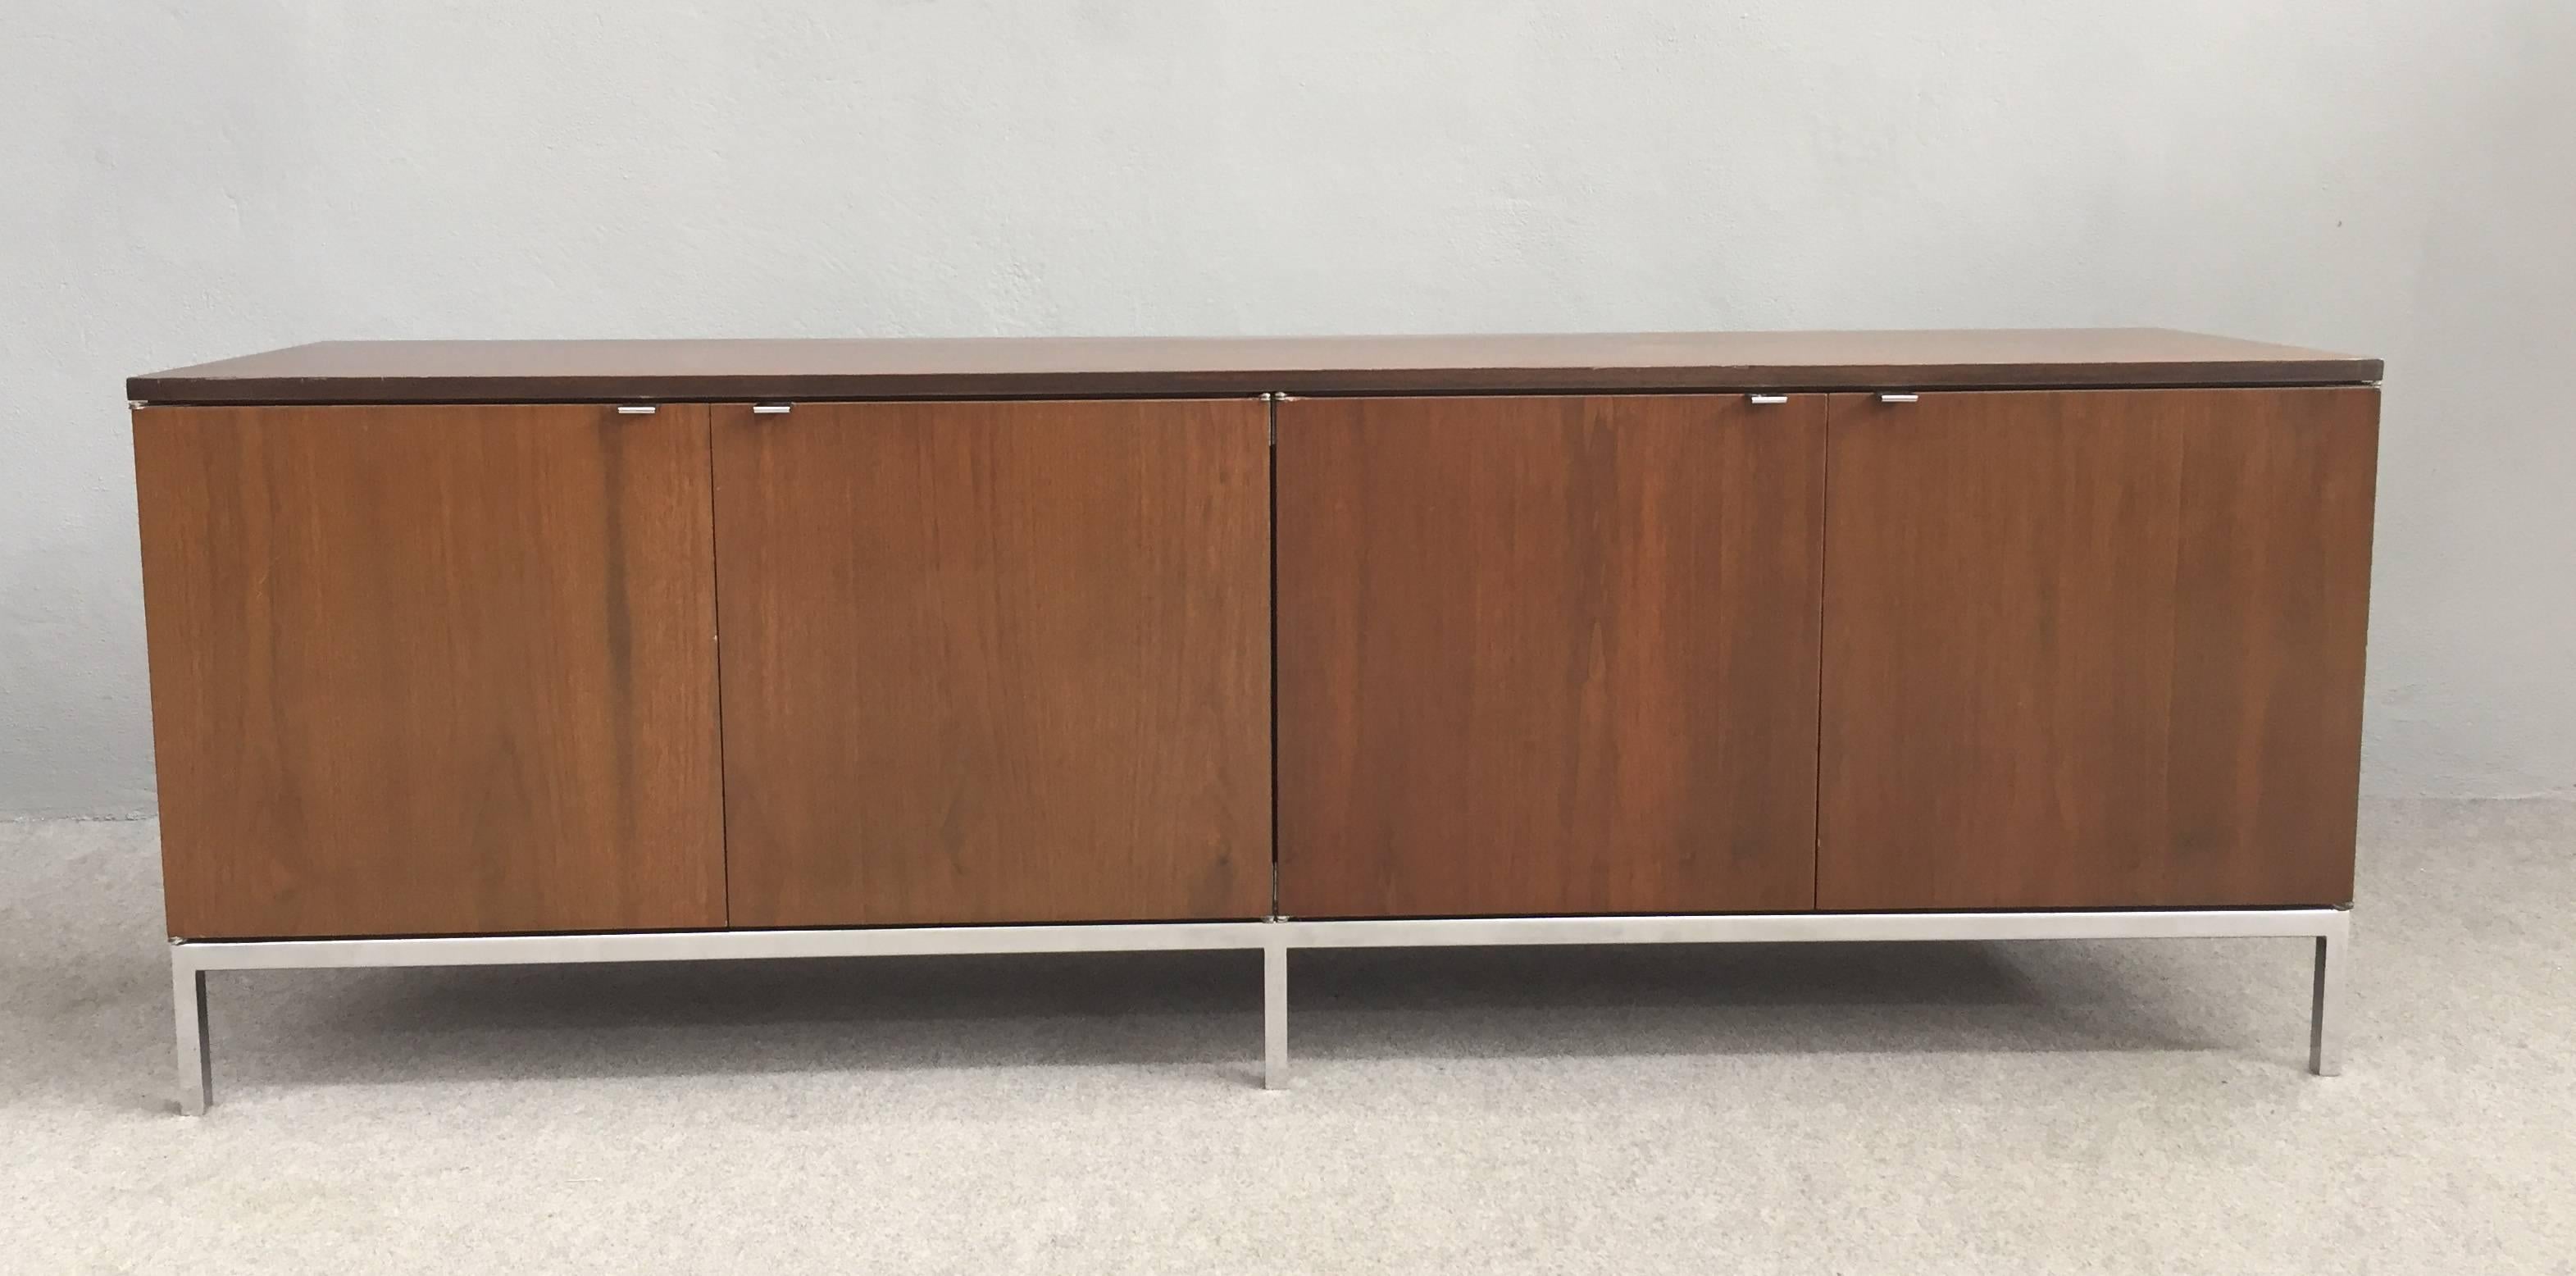 Sideboard model 2544, by Florence Knoll, manufactured by Knoll International.
Chrome-plated steel and teak veneered wood.
Literature: Brian Lutz, Knoll un universo moderno, Sassi Editore, Schio, 2011, p. 160.